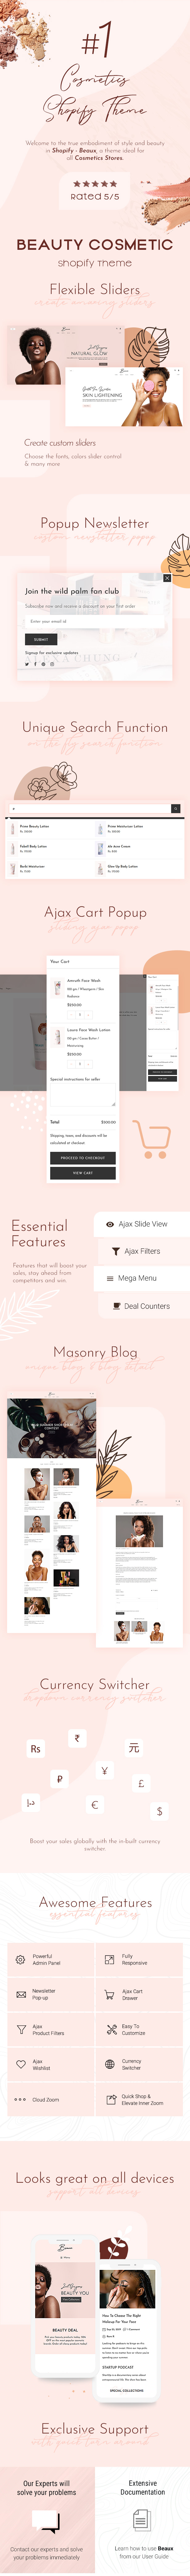 Beaux - Cosmetic Store Shopify Theme - 2